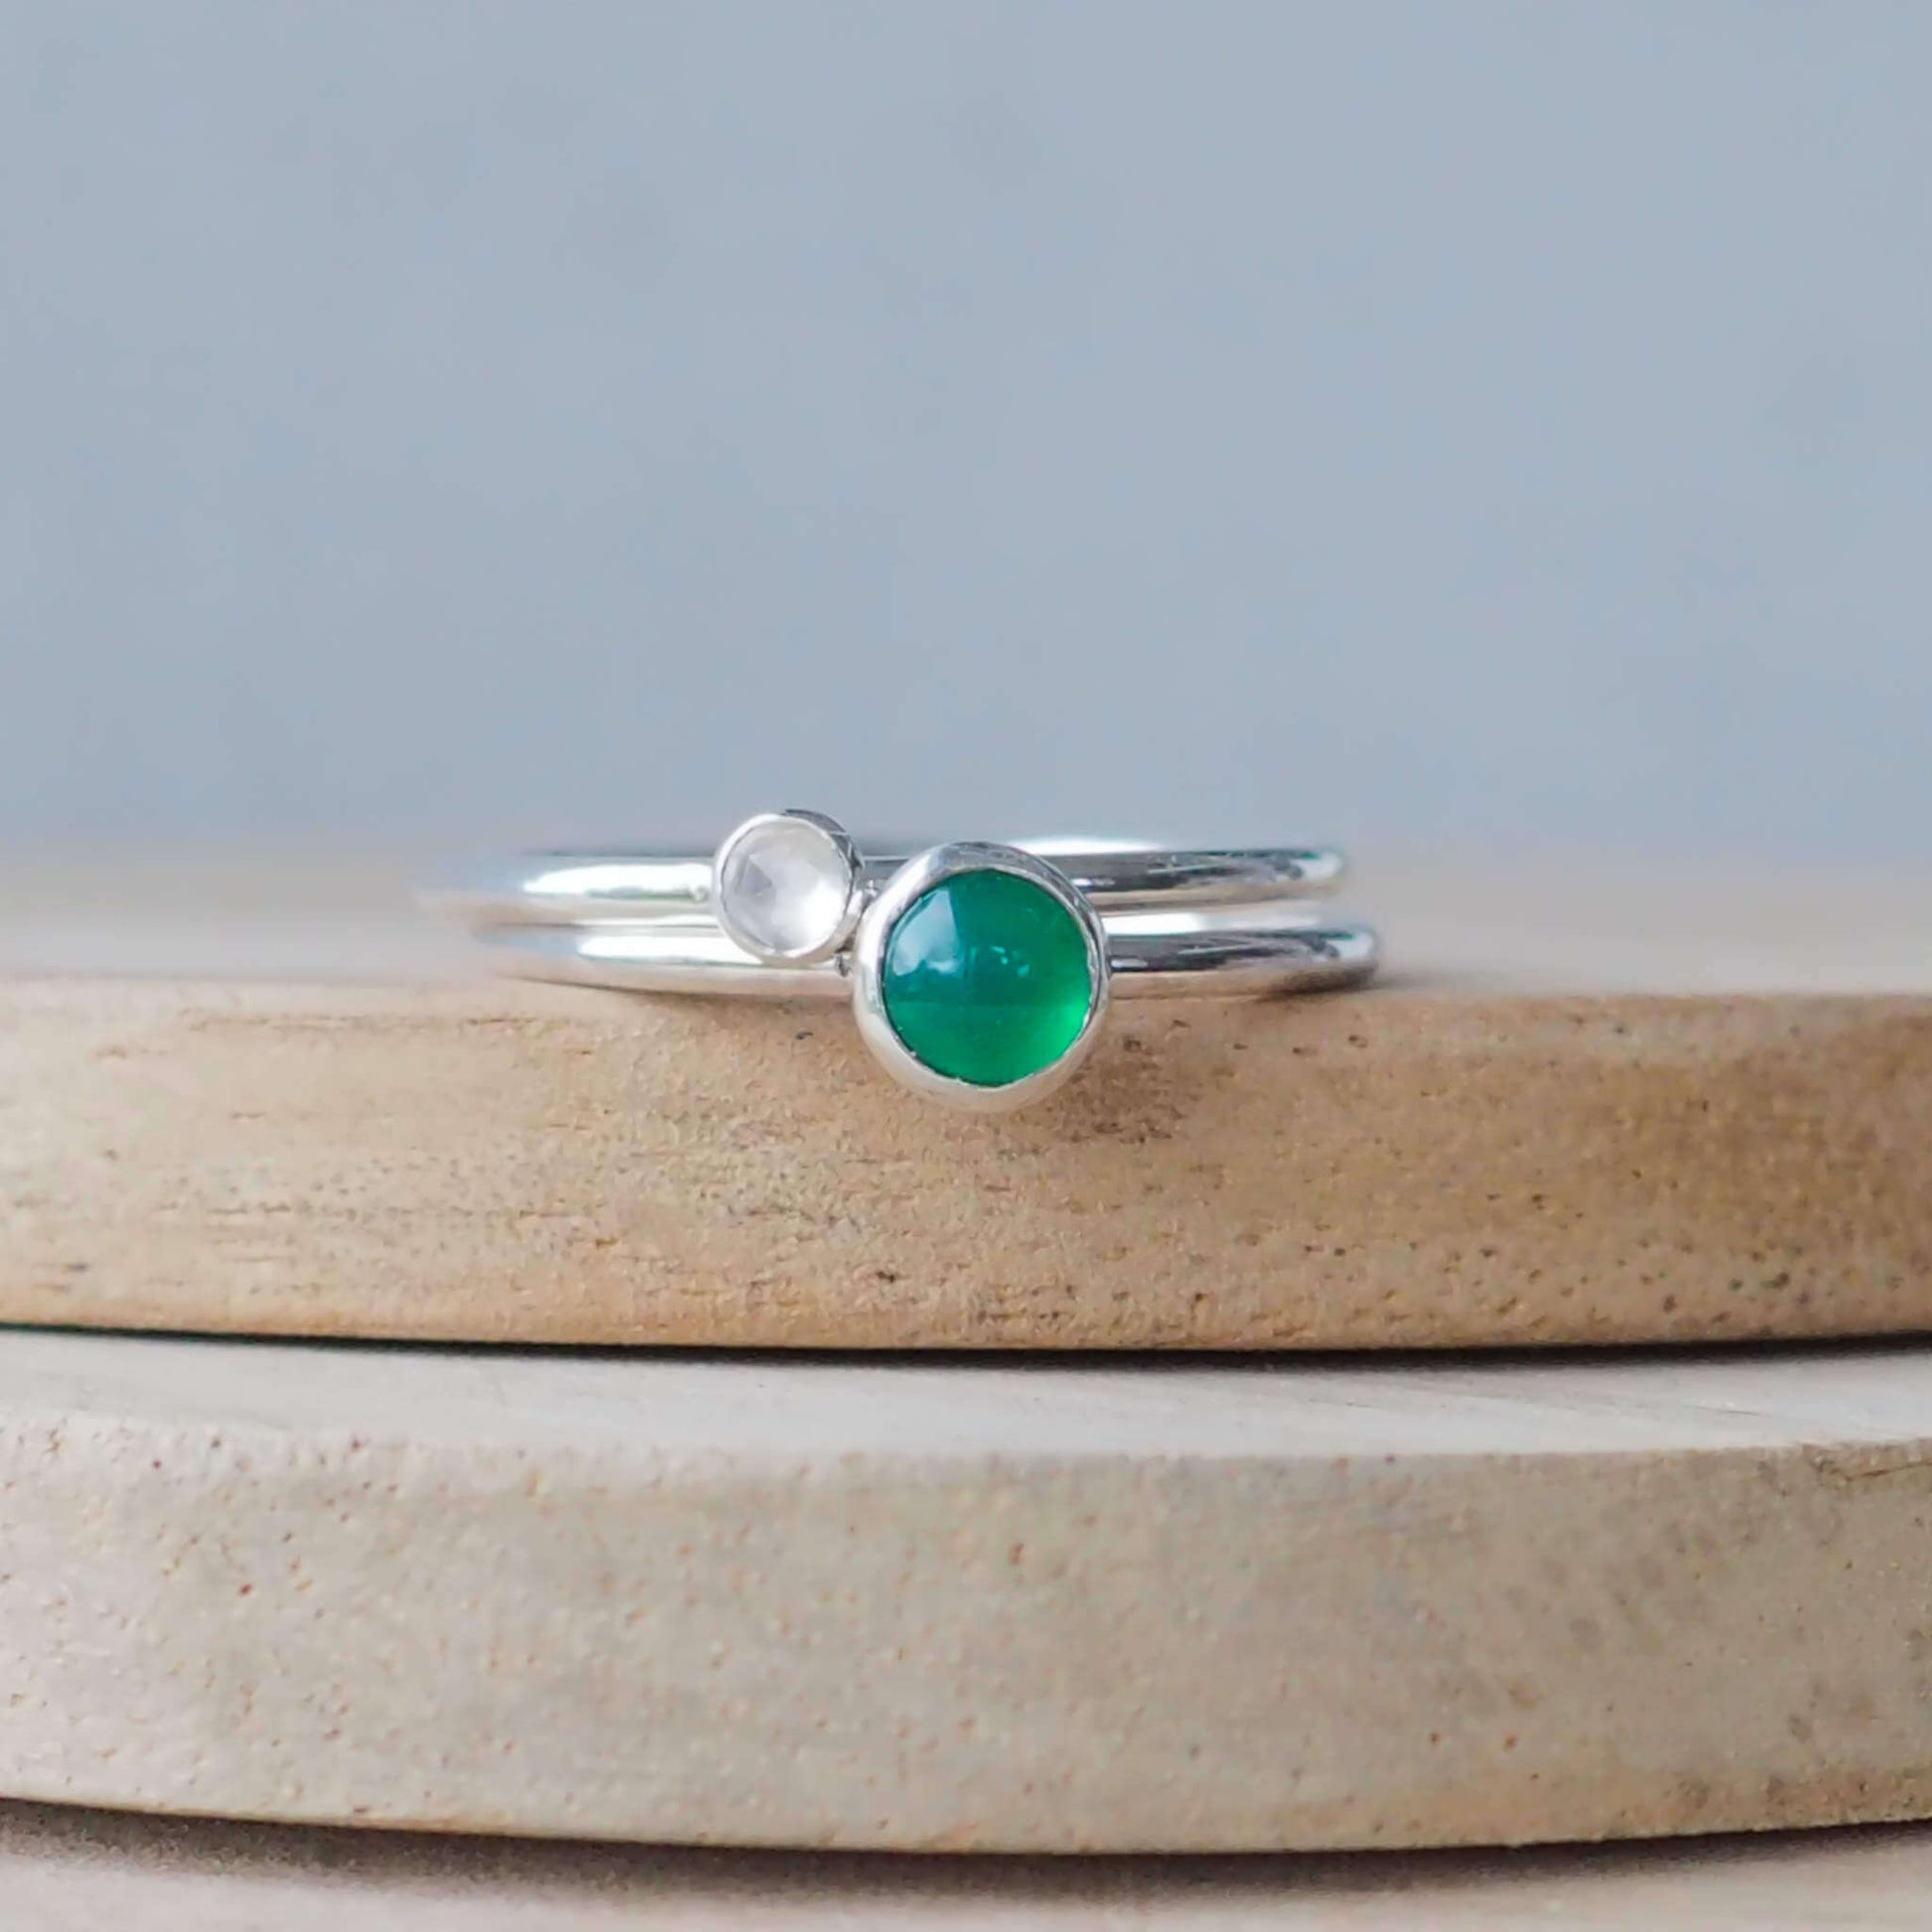 Two silver ring set with round stones. Simple round bands with a 5mm Green Agate and a 3mm White Topaz. Rings are pictured on wood background. Handmade in Scotland by Maram Jewellery